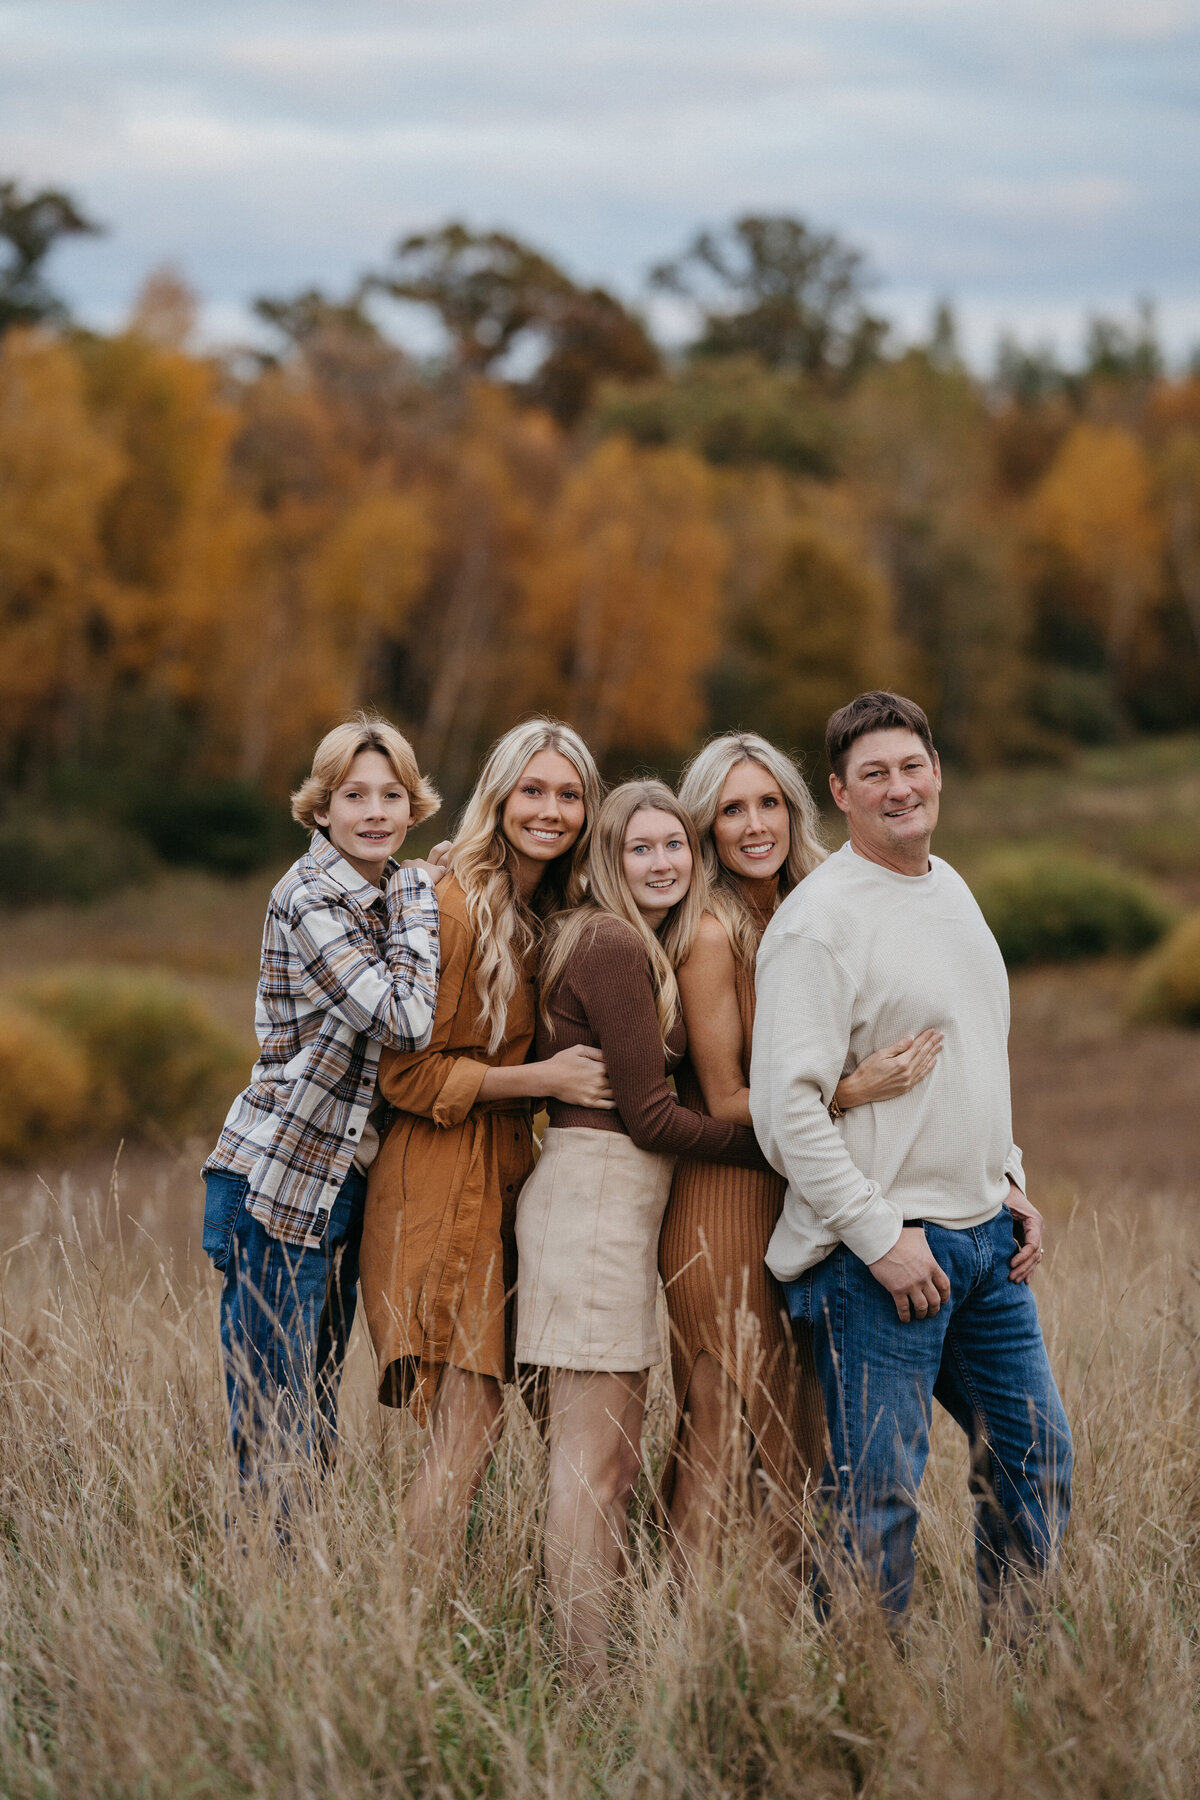 Beyond the Pines Photography C family8160